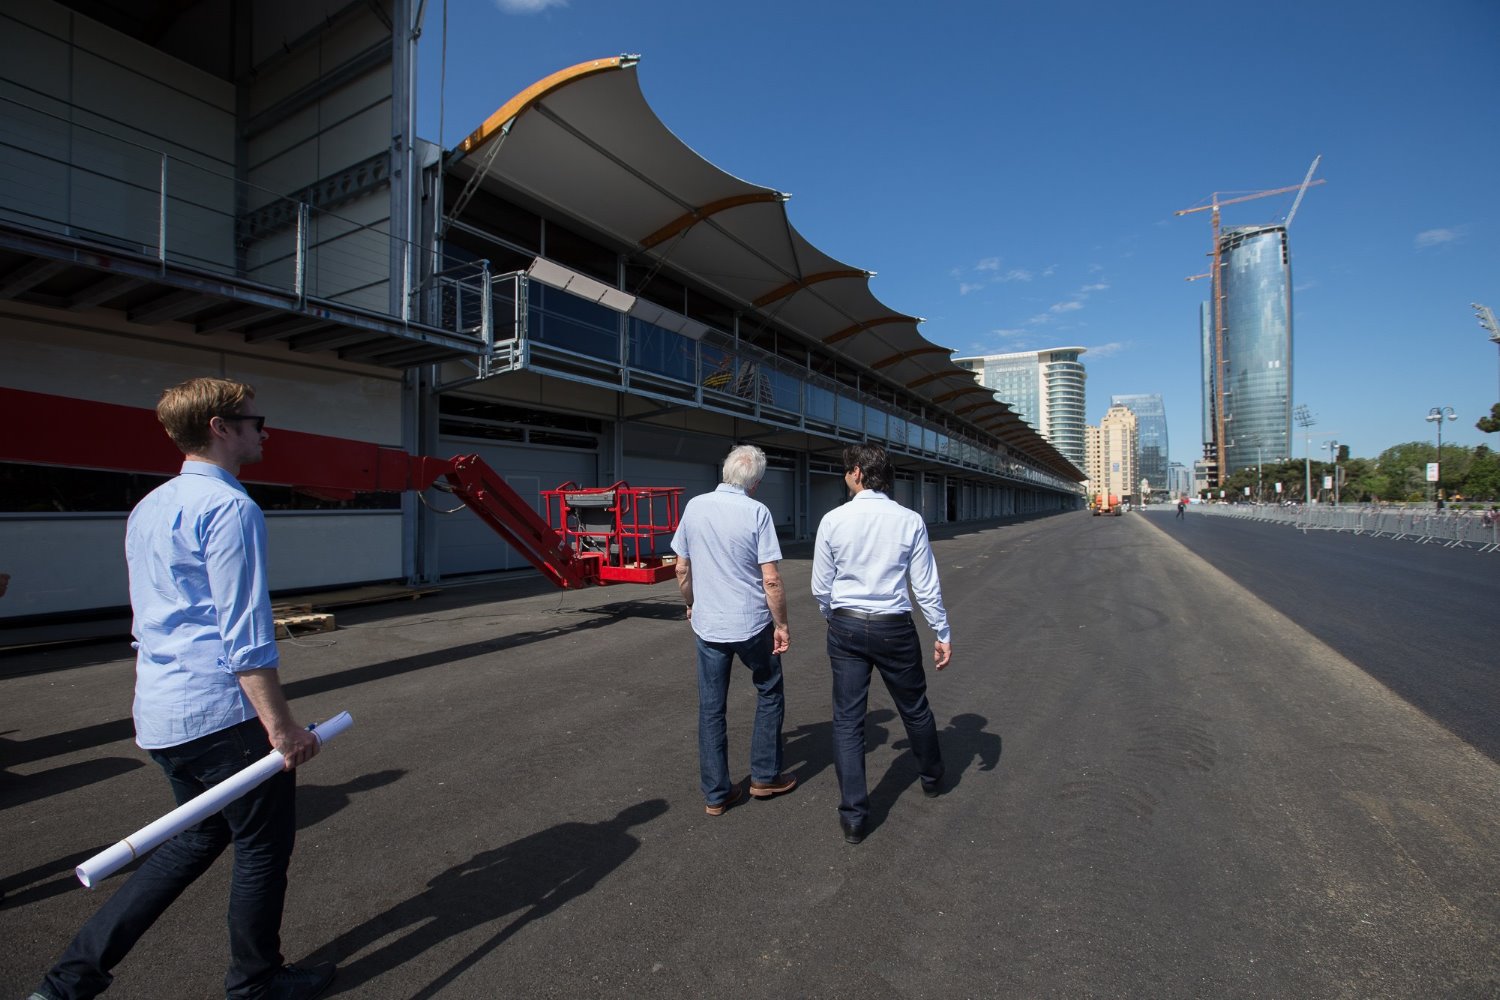 Baku is ready for F1